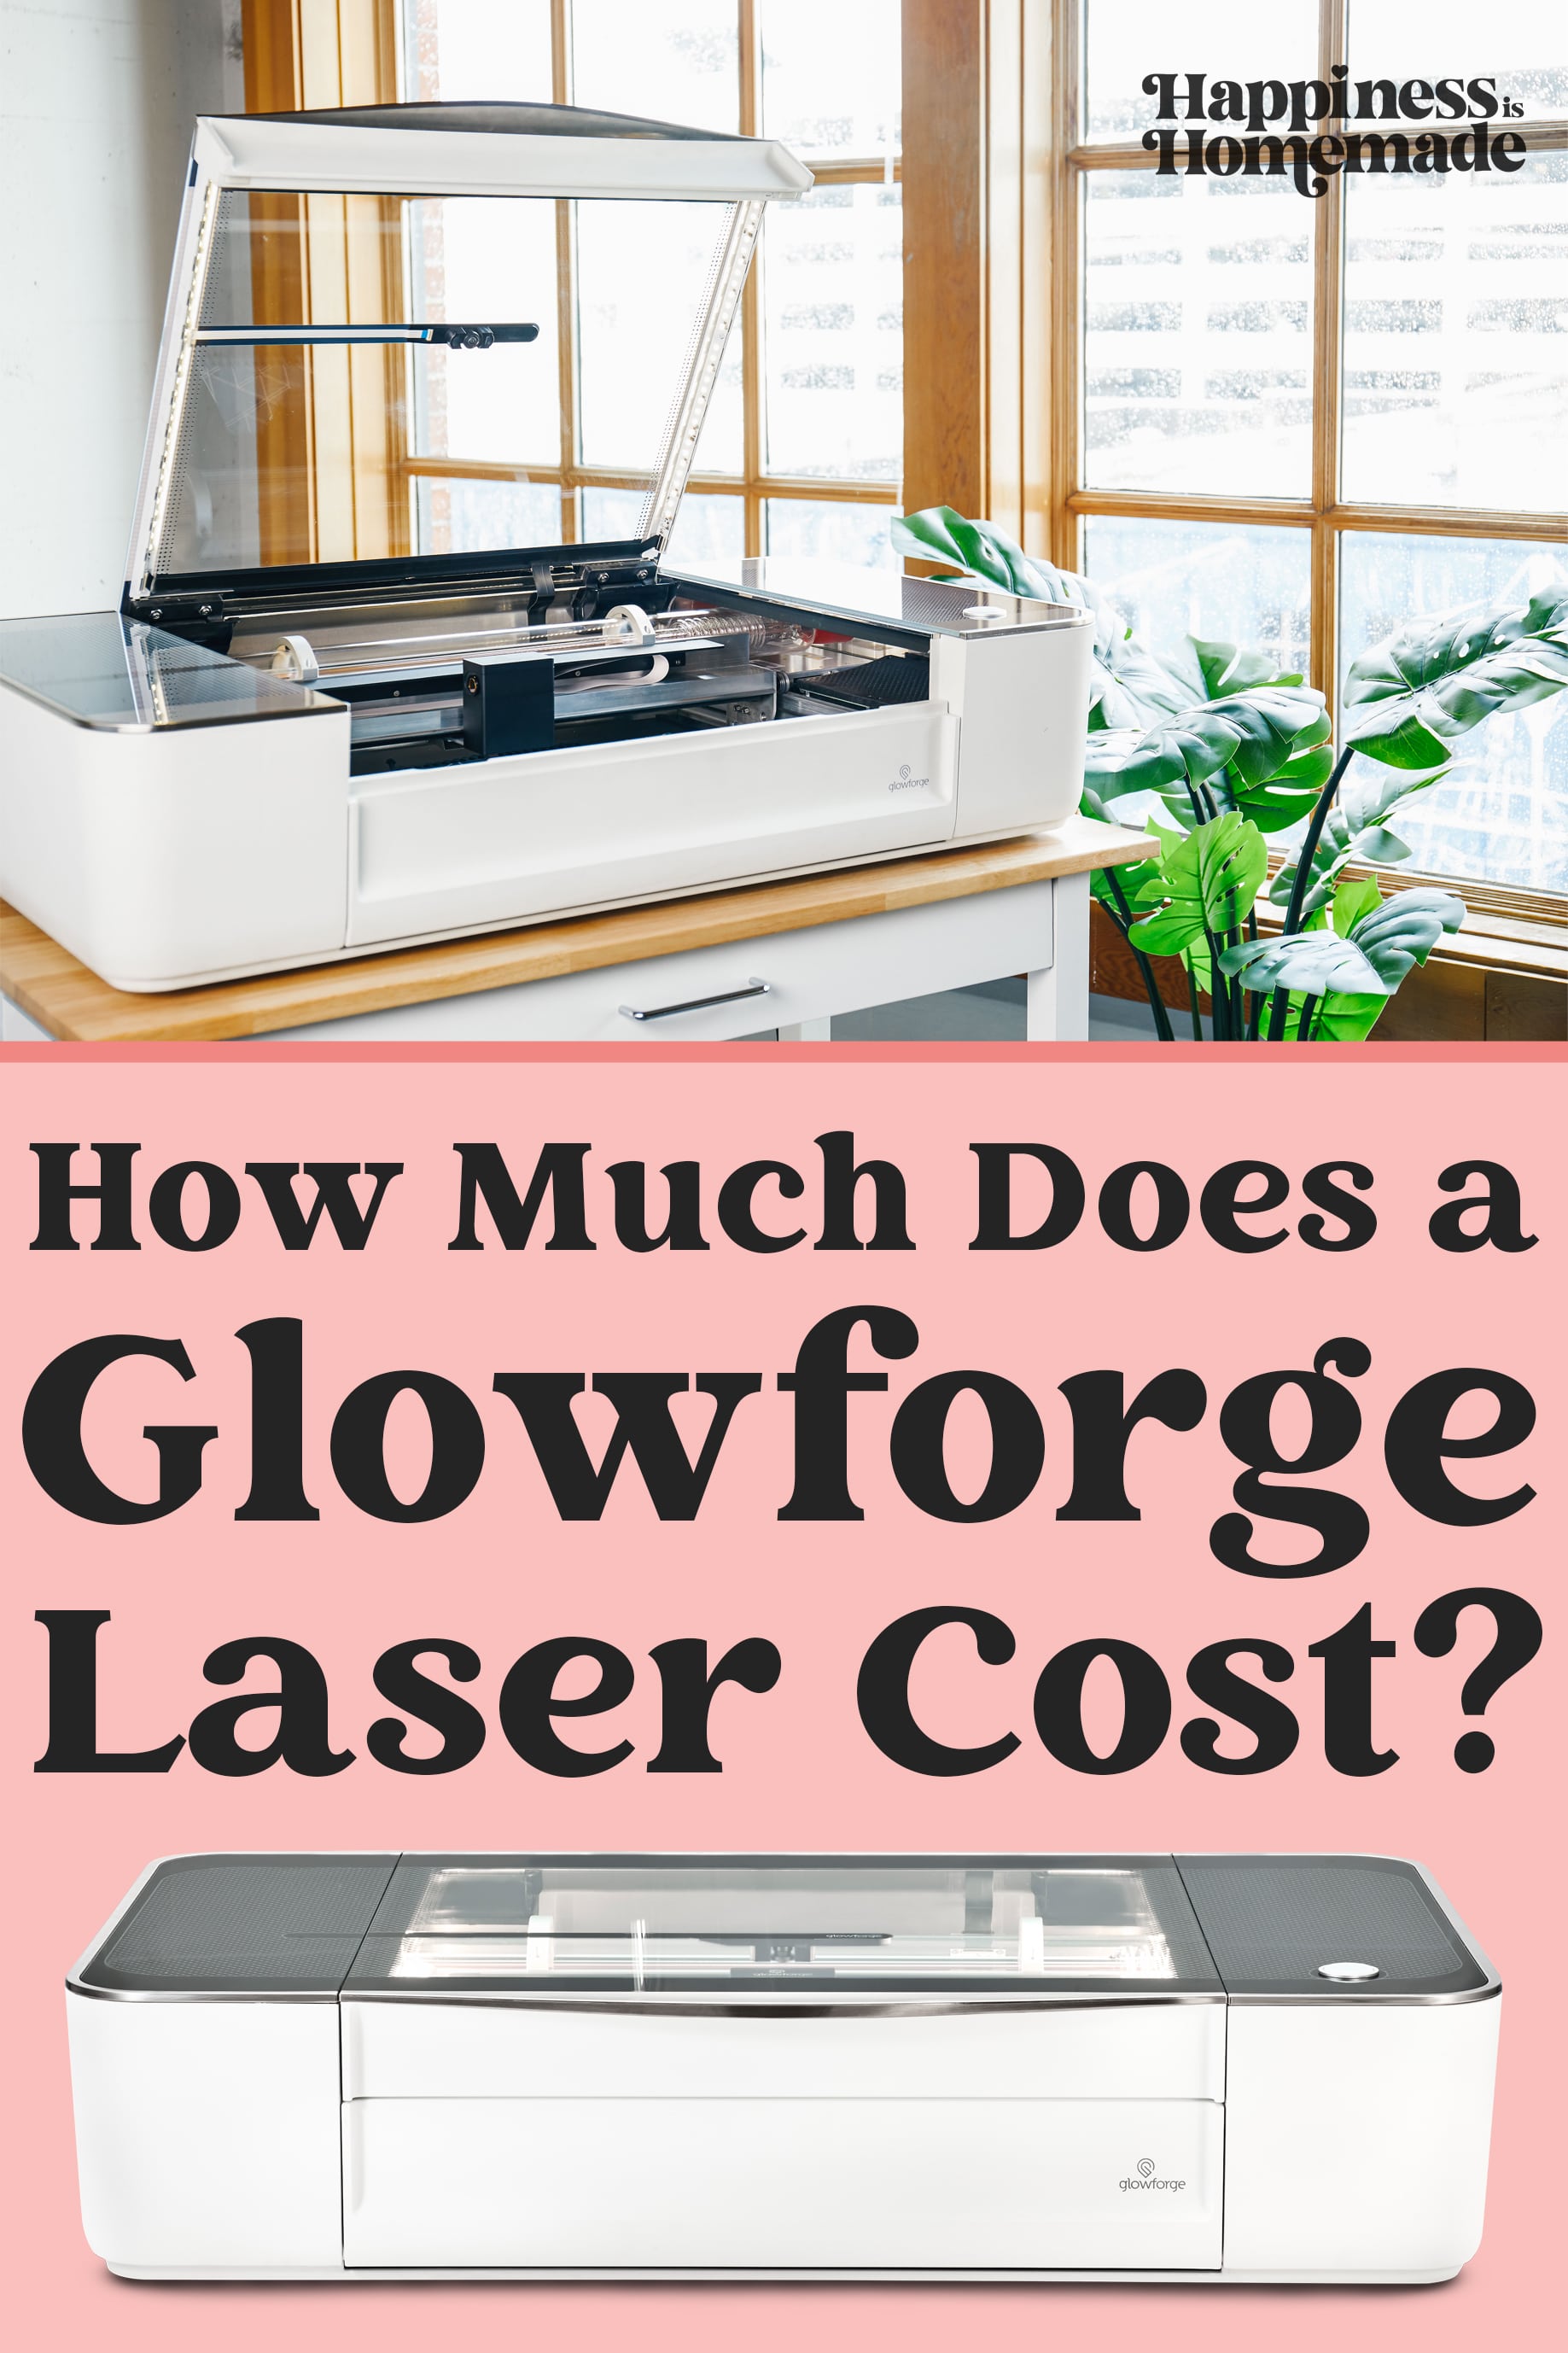 How Much Does a Glowforge Cost?